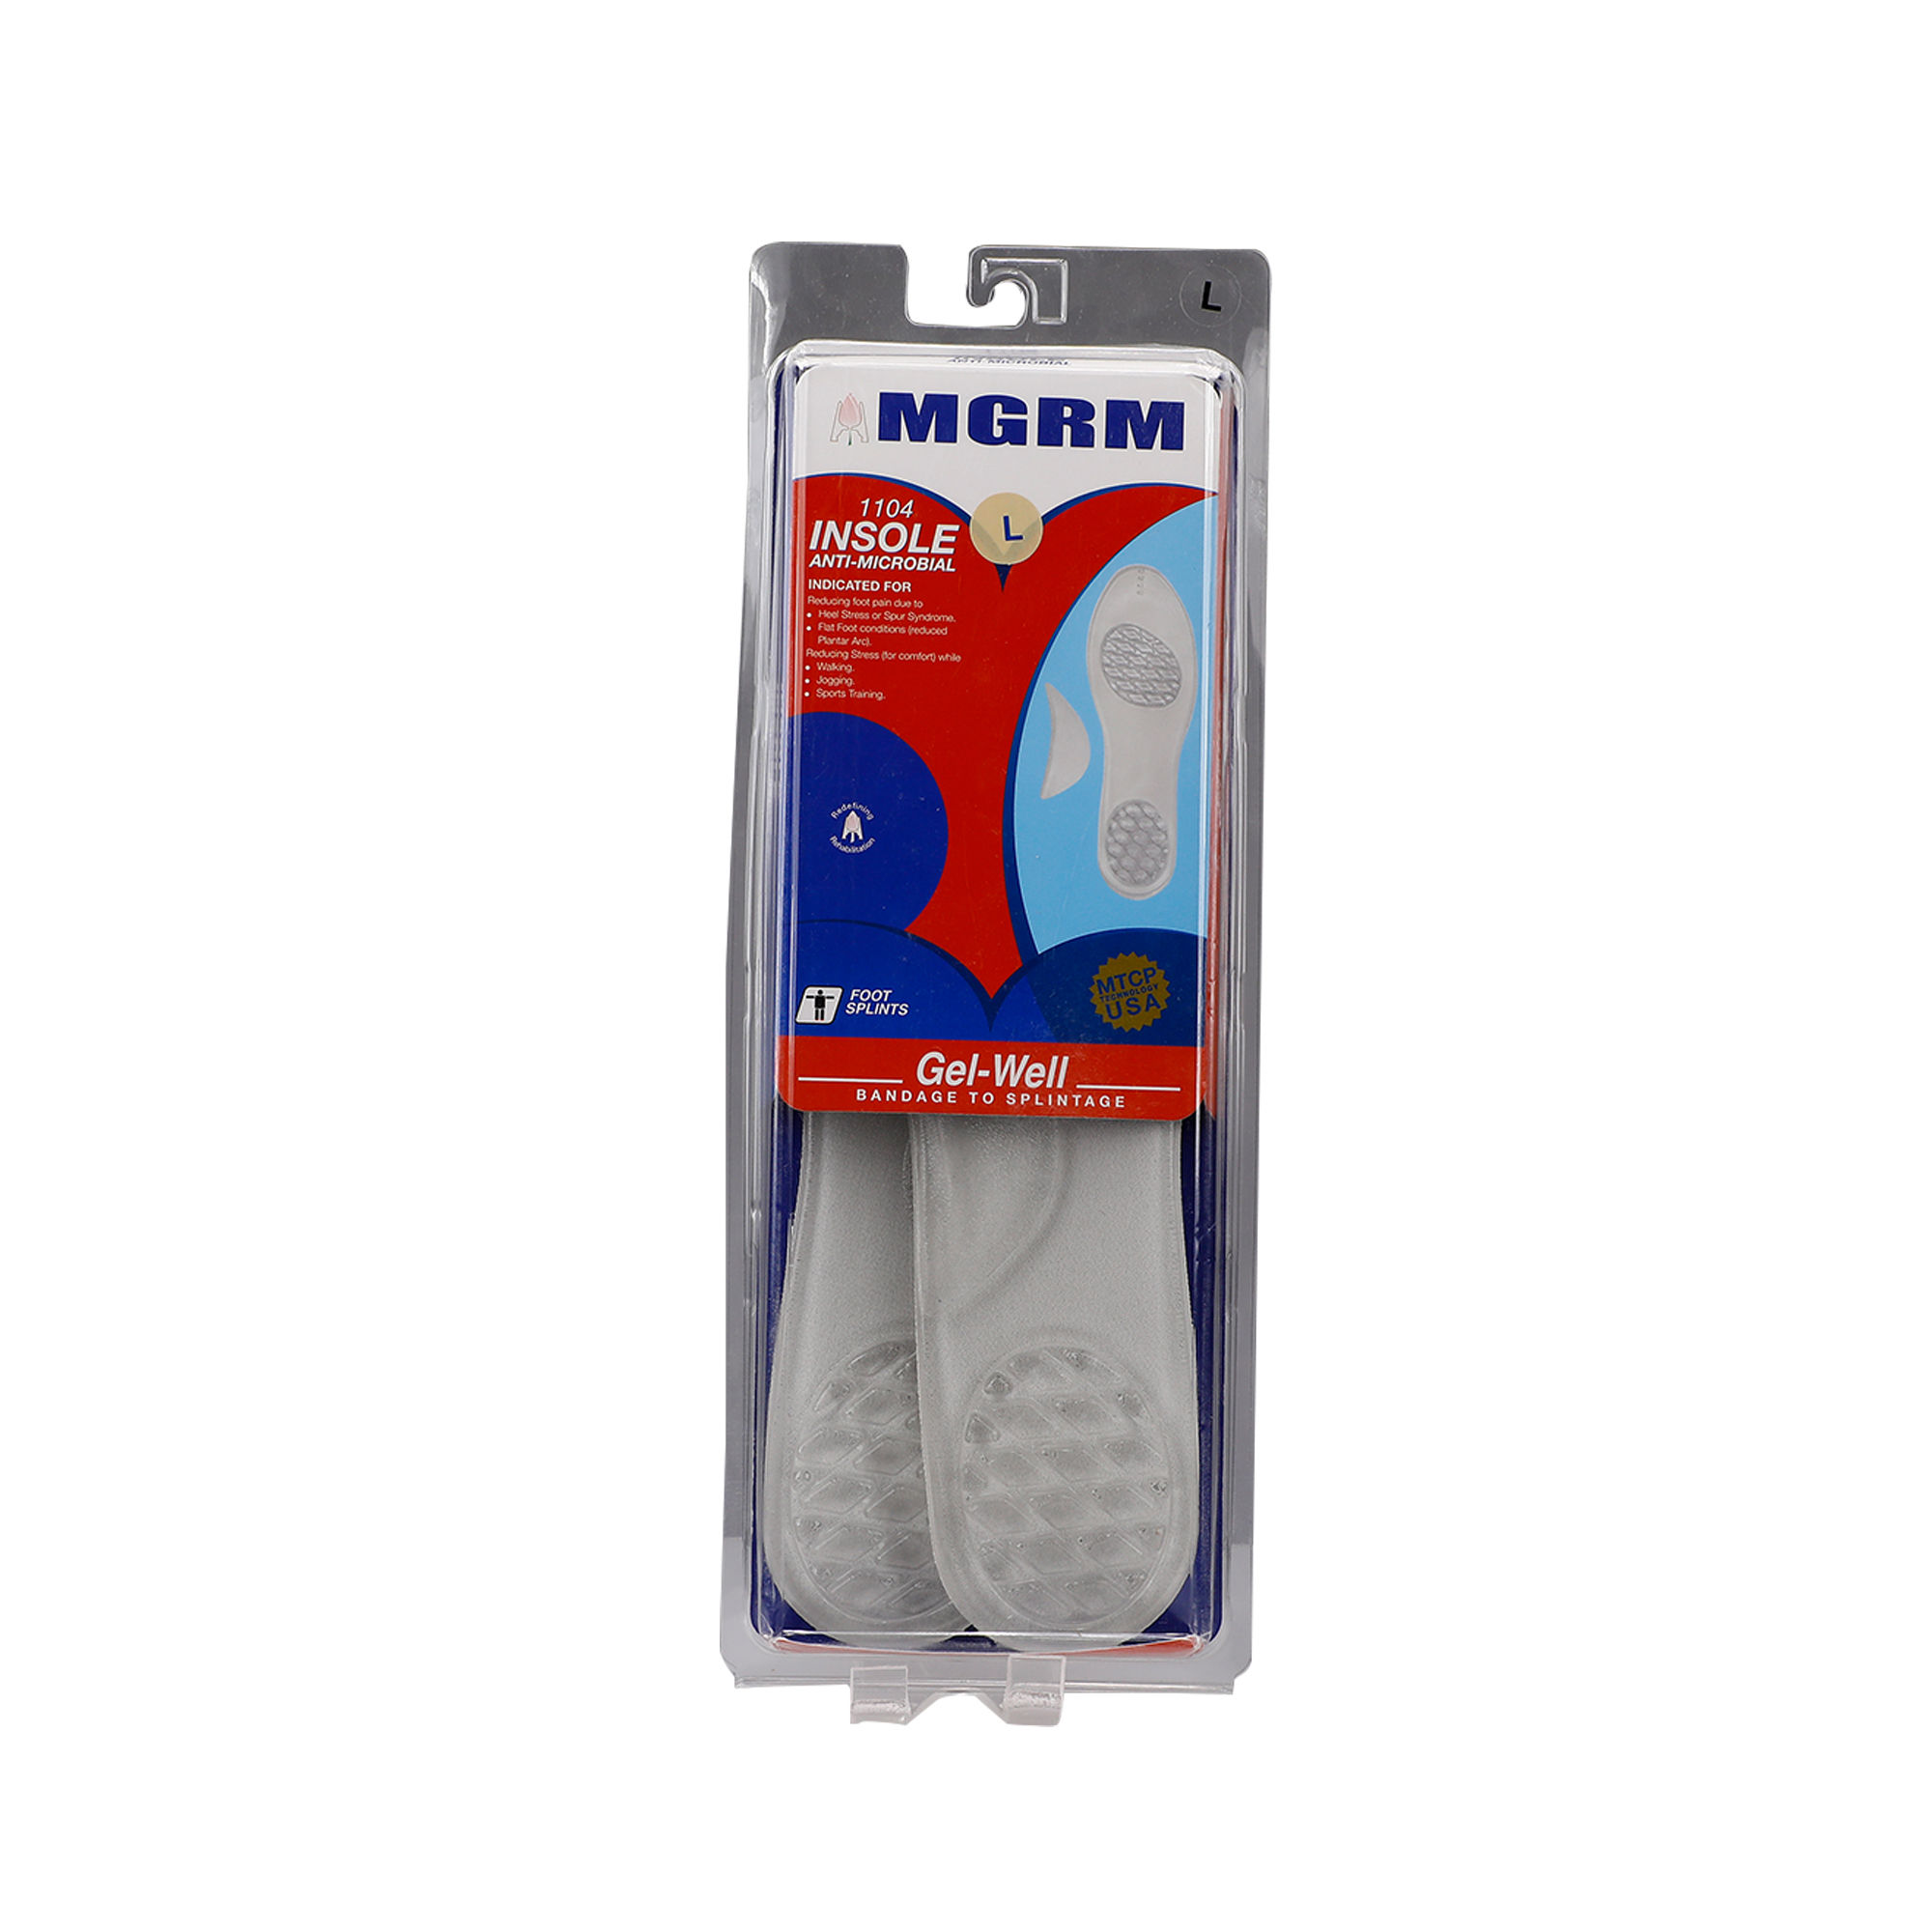 Buy Mgrm Insole-L 1104 Online